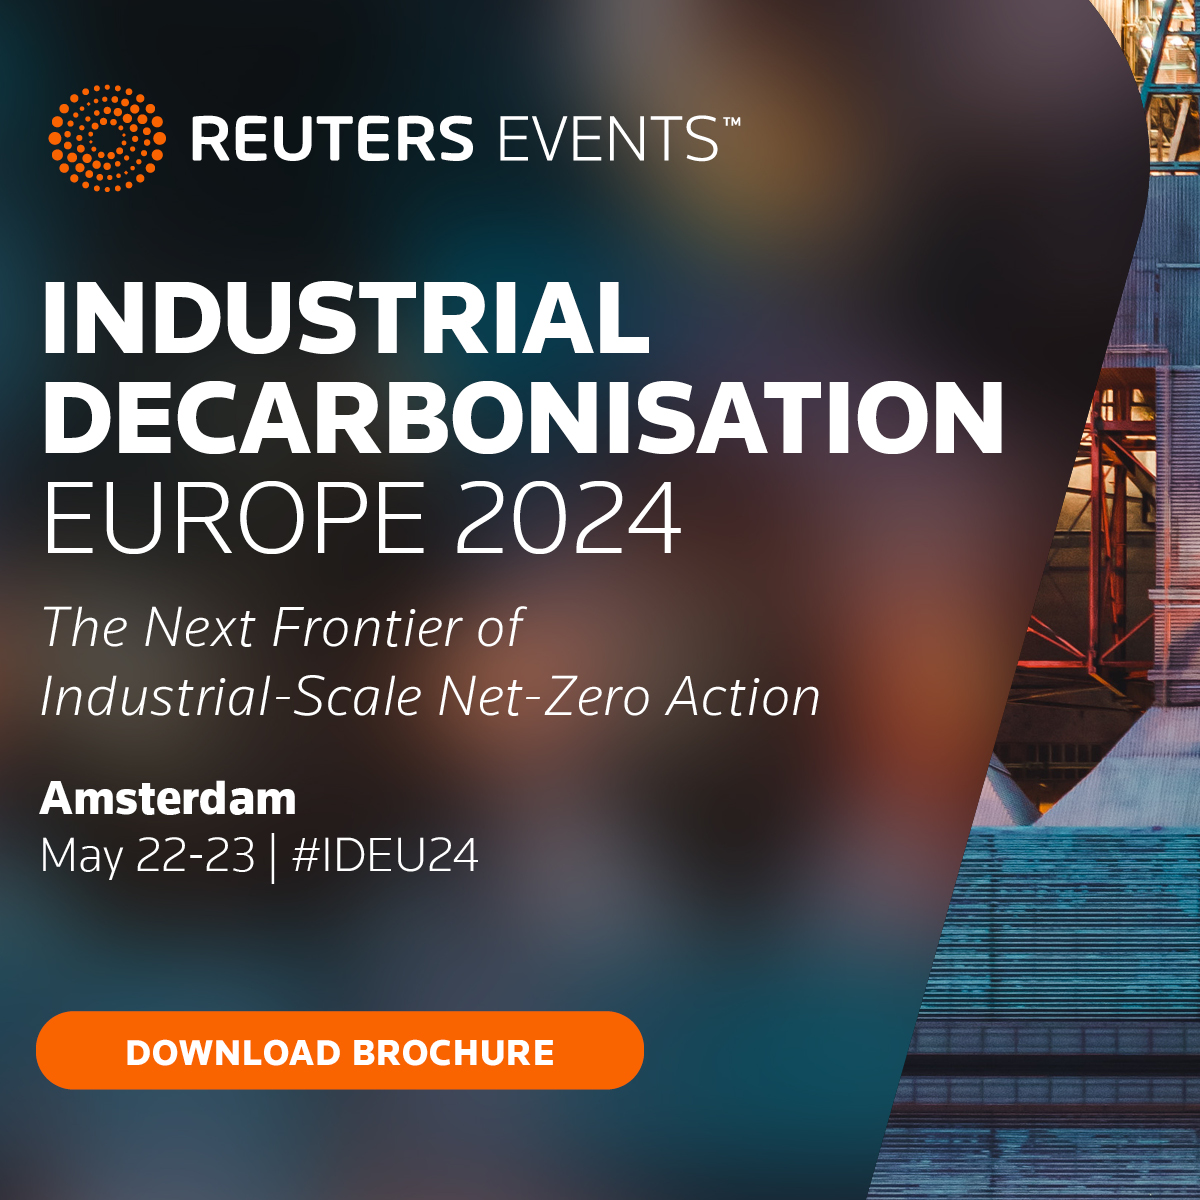 Our Director of Strategy & Communications Stuart Neil will be in attendance and moderating a key session at @reutersevents: Industrial Decarbonisation Europe, happening next week! More information at events.reutersevents.com/energy-transit… #IDEU2024 #industrialdecarbonisation #netzero